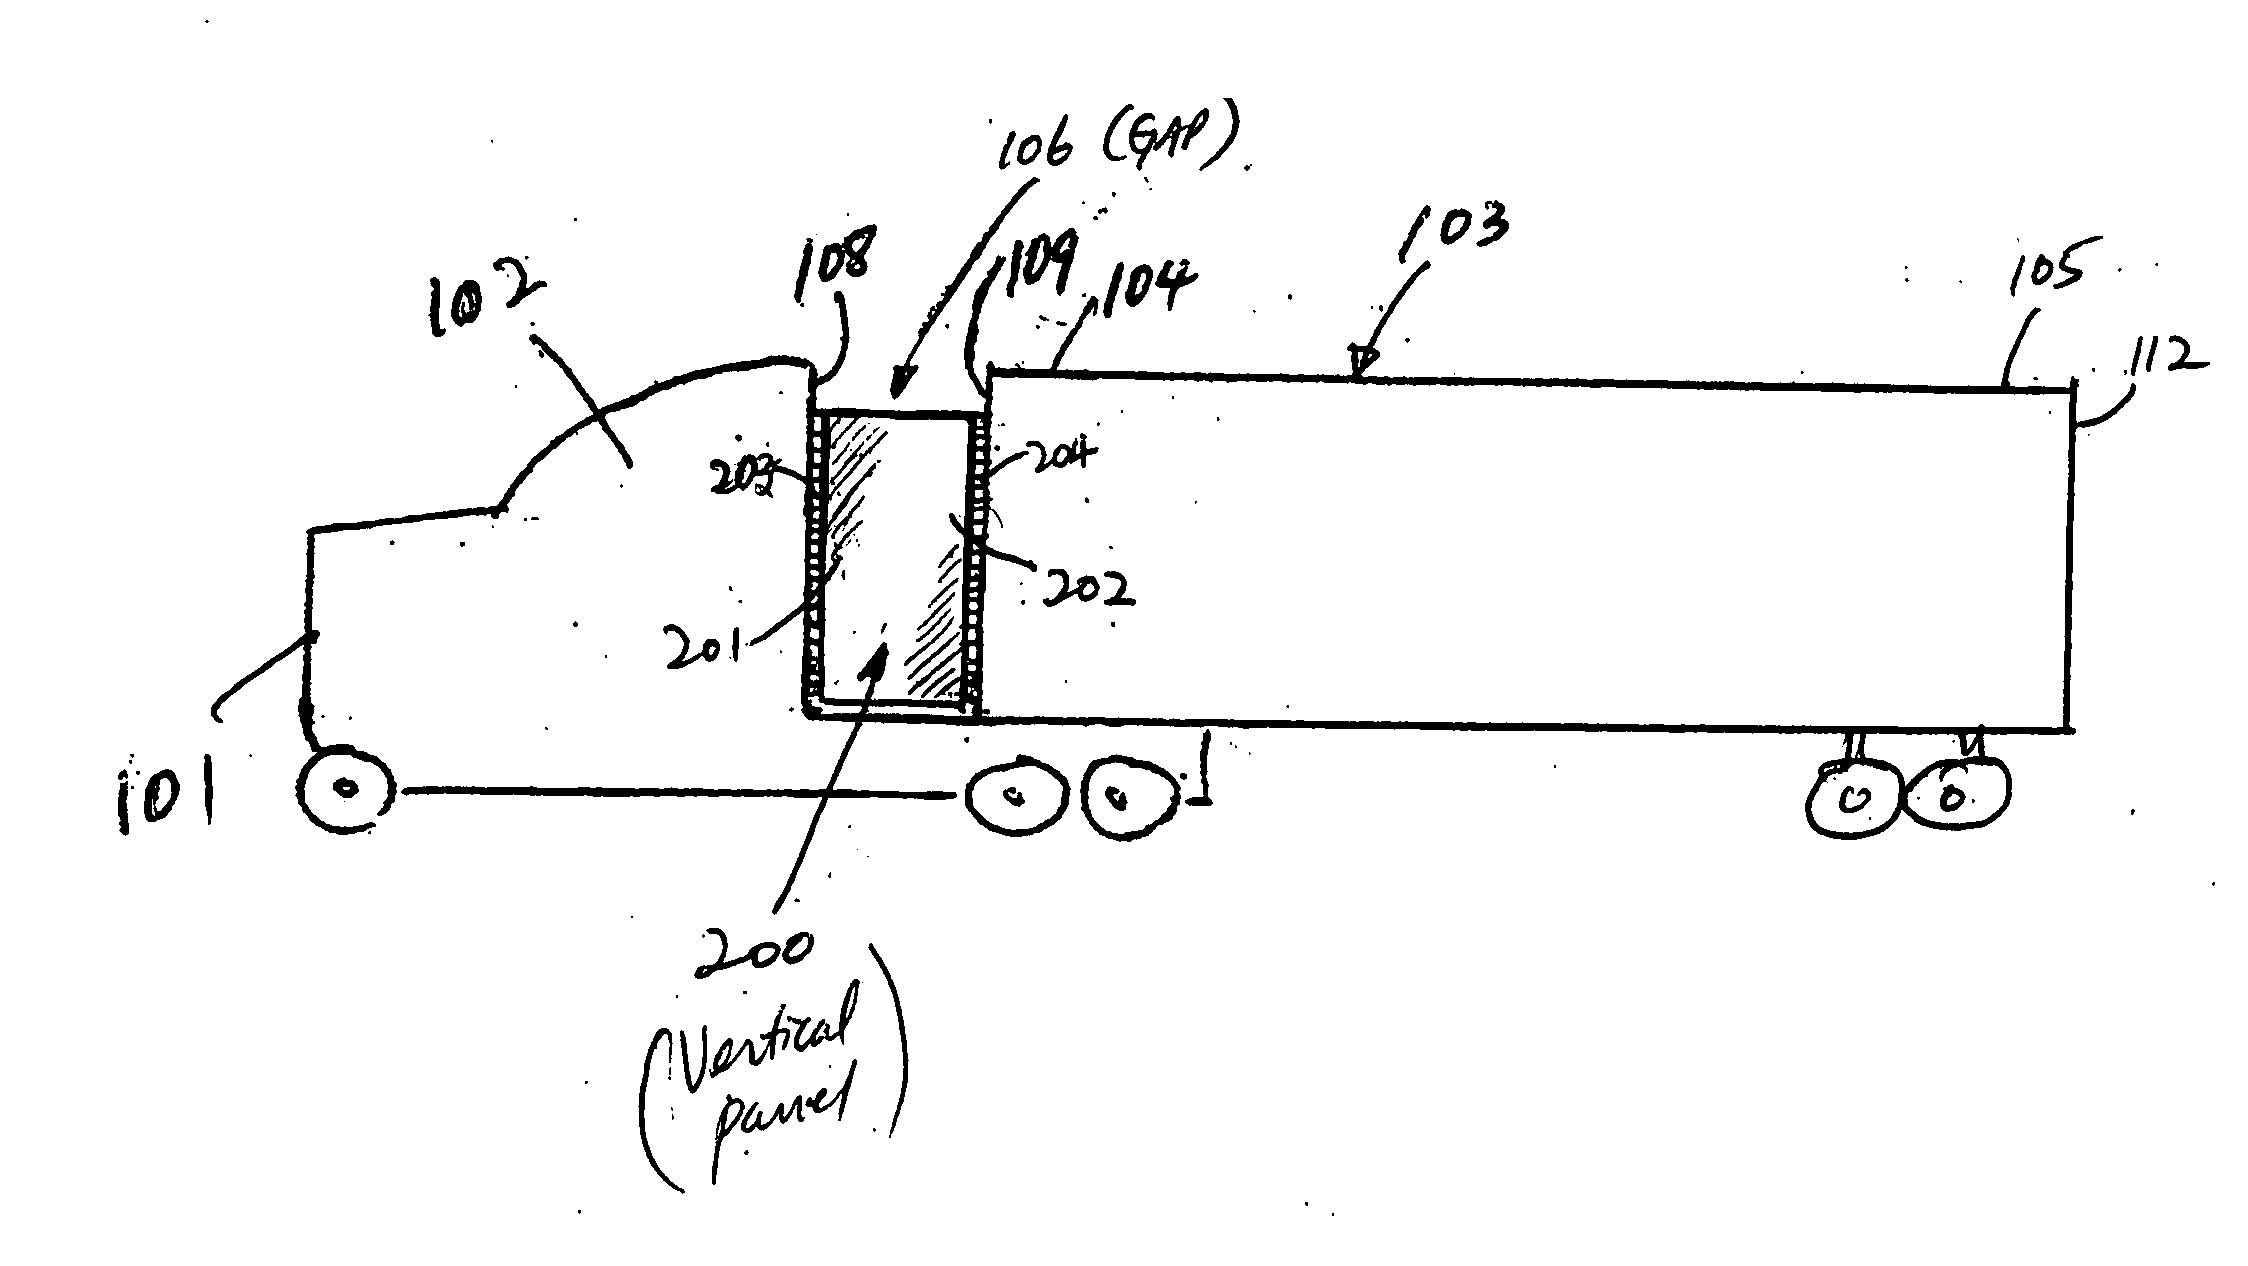 Aerodynamic drag reduction apparatus for gap-divided bluff bodies such as tractor-trailers